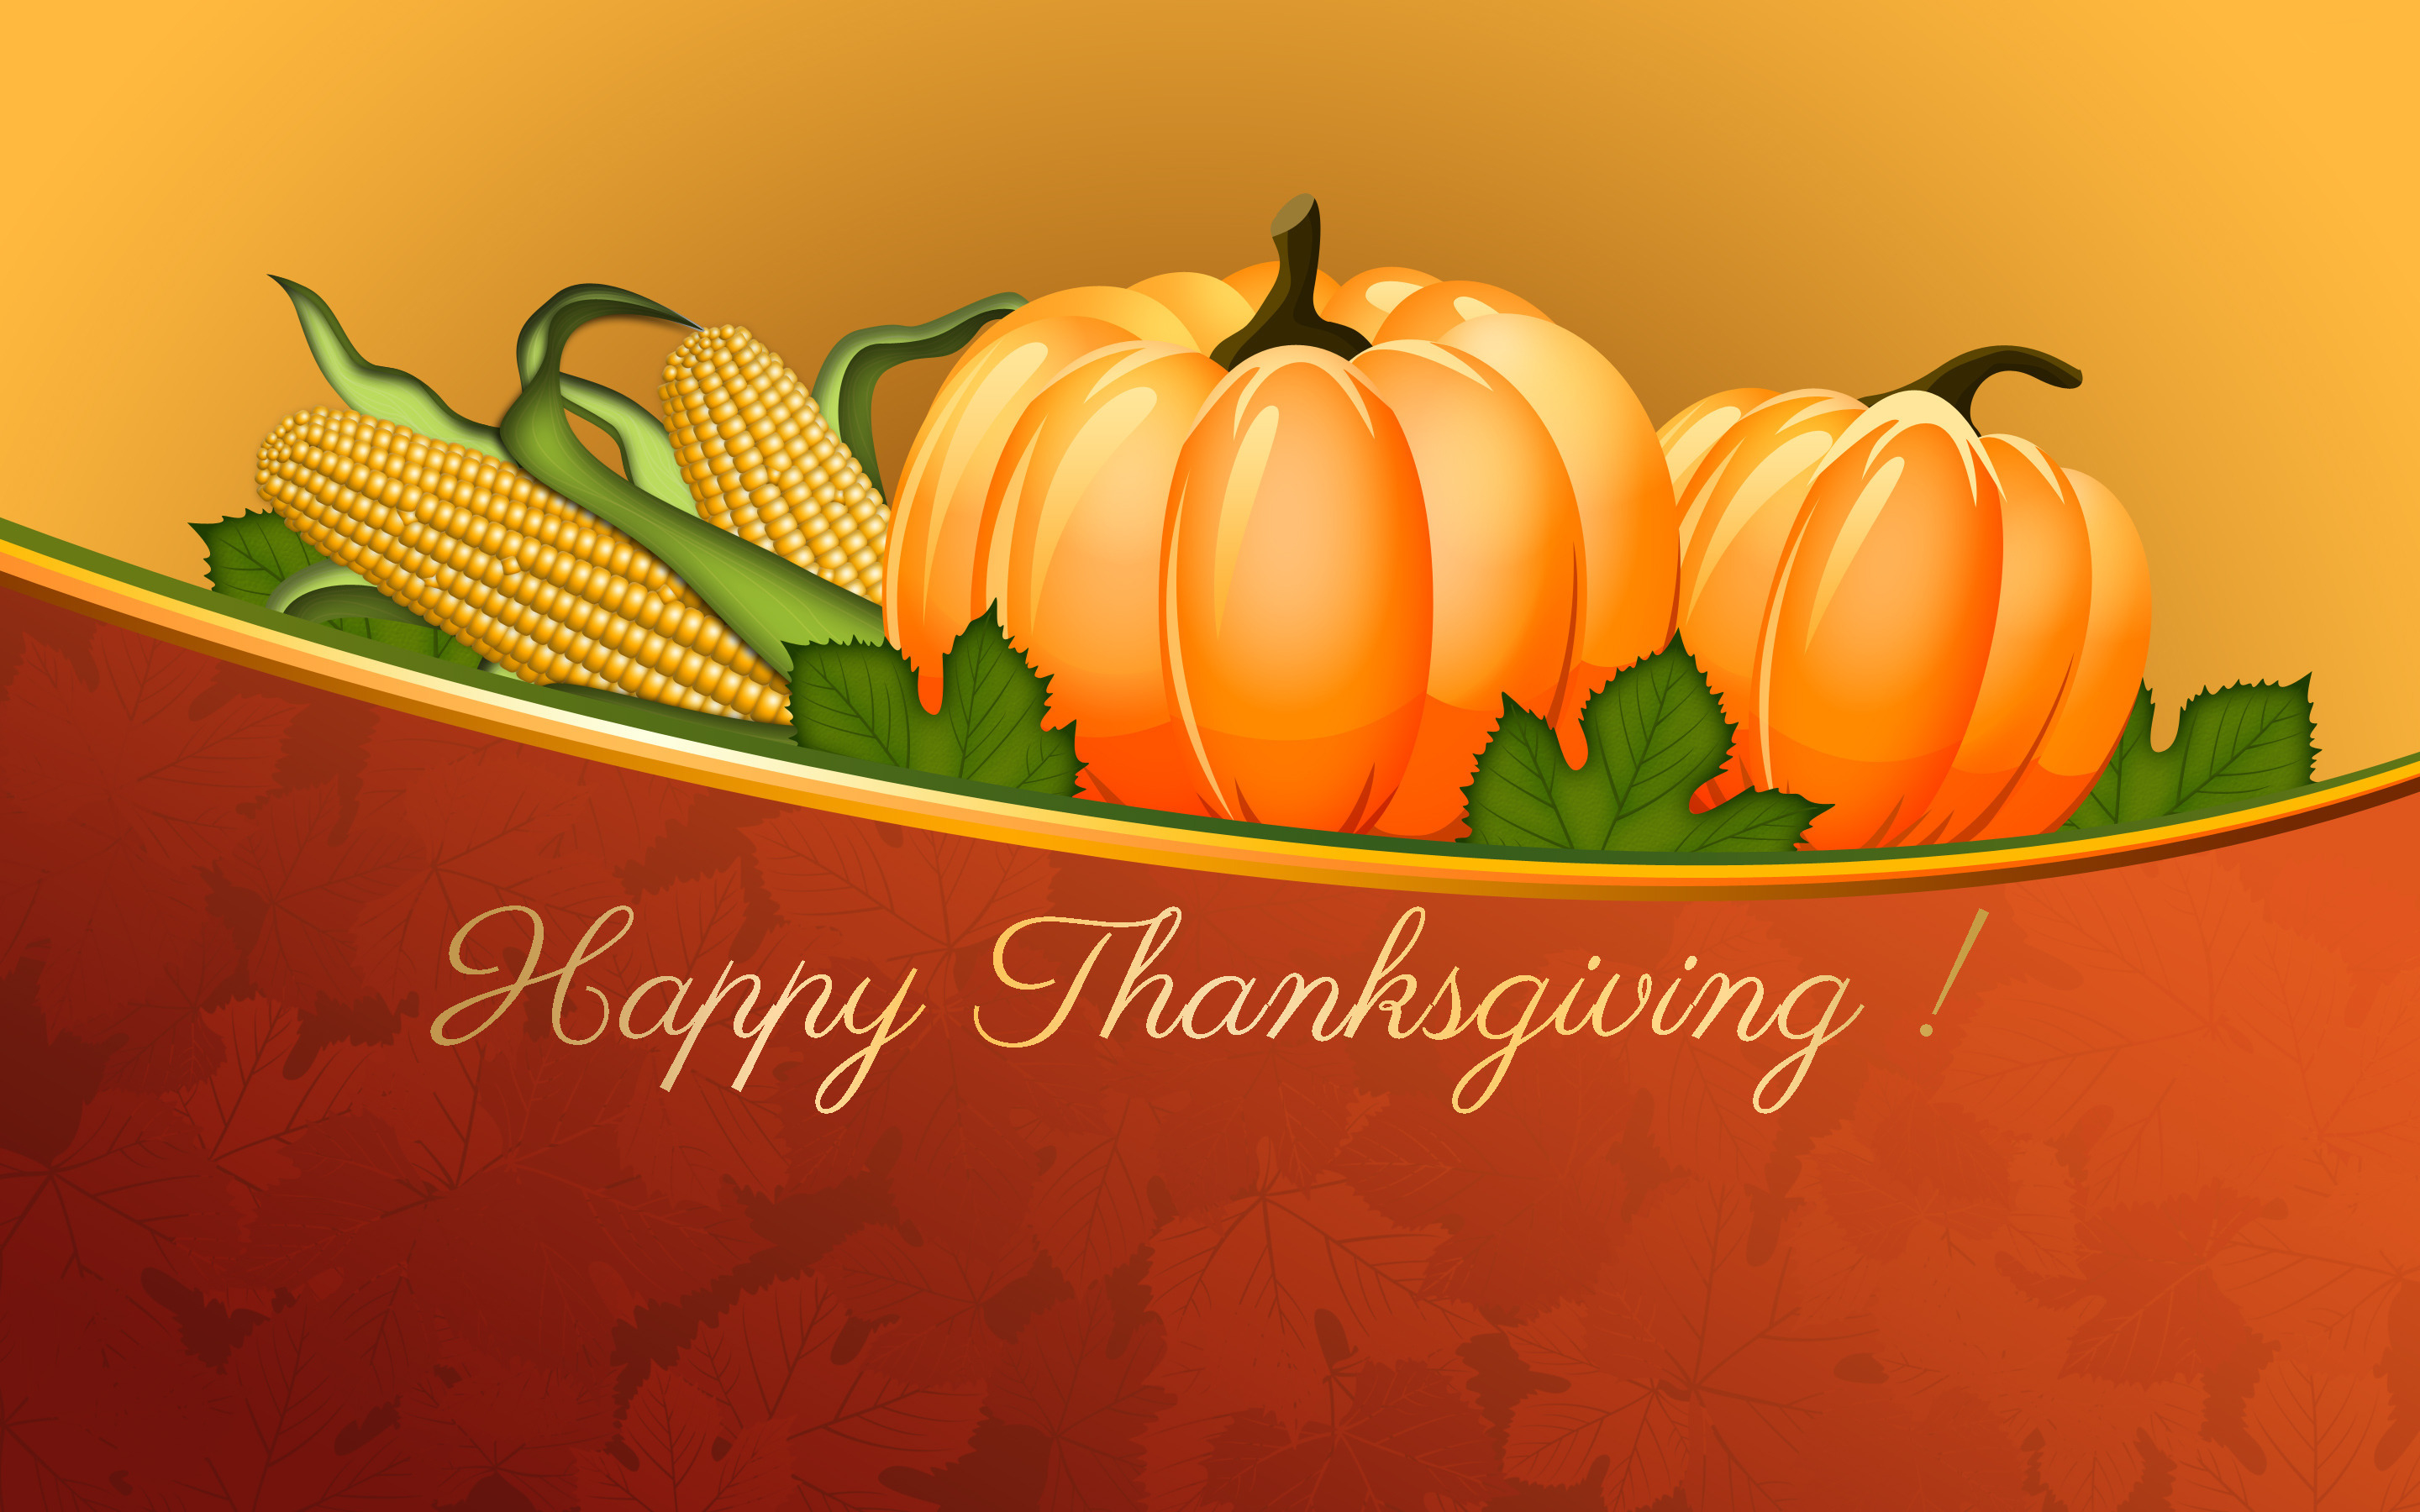 Thanksgiving Wallpaper Pictures Image